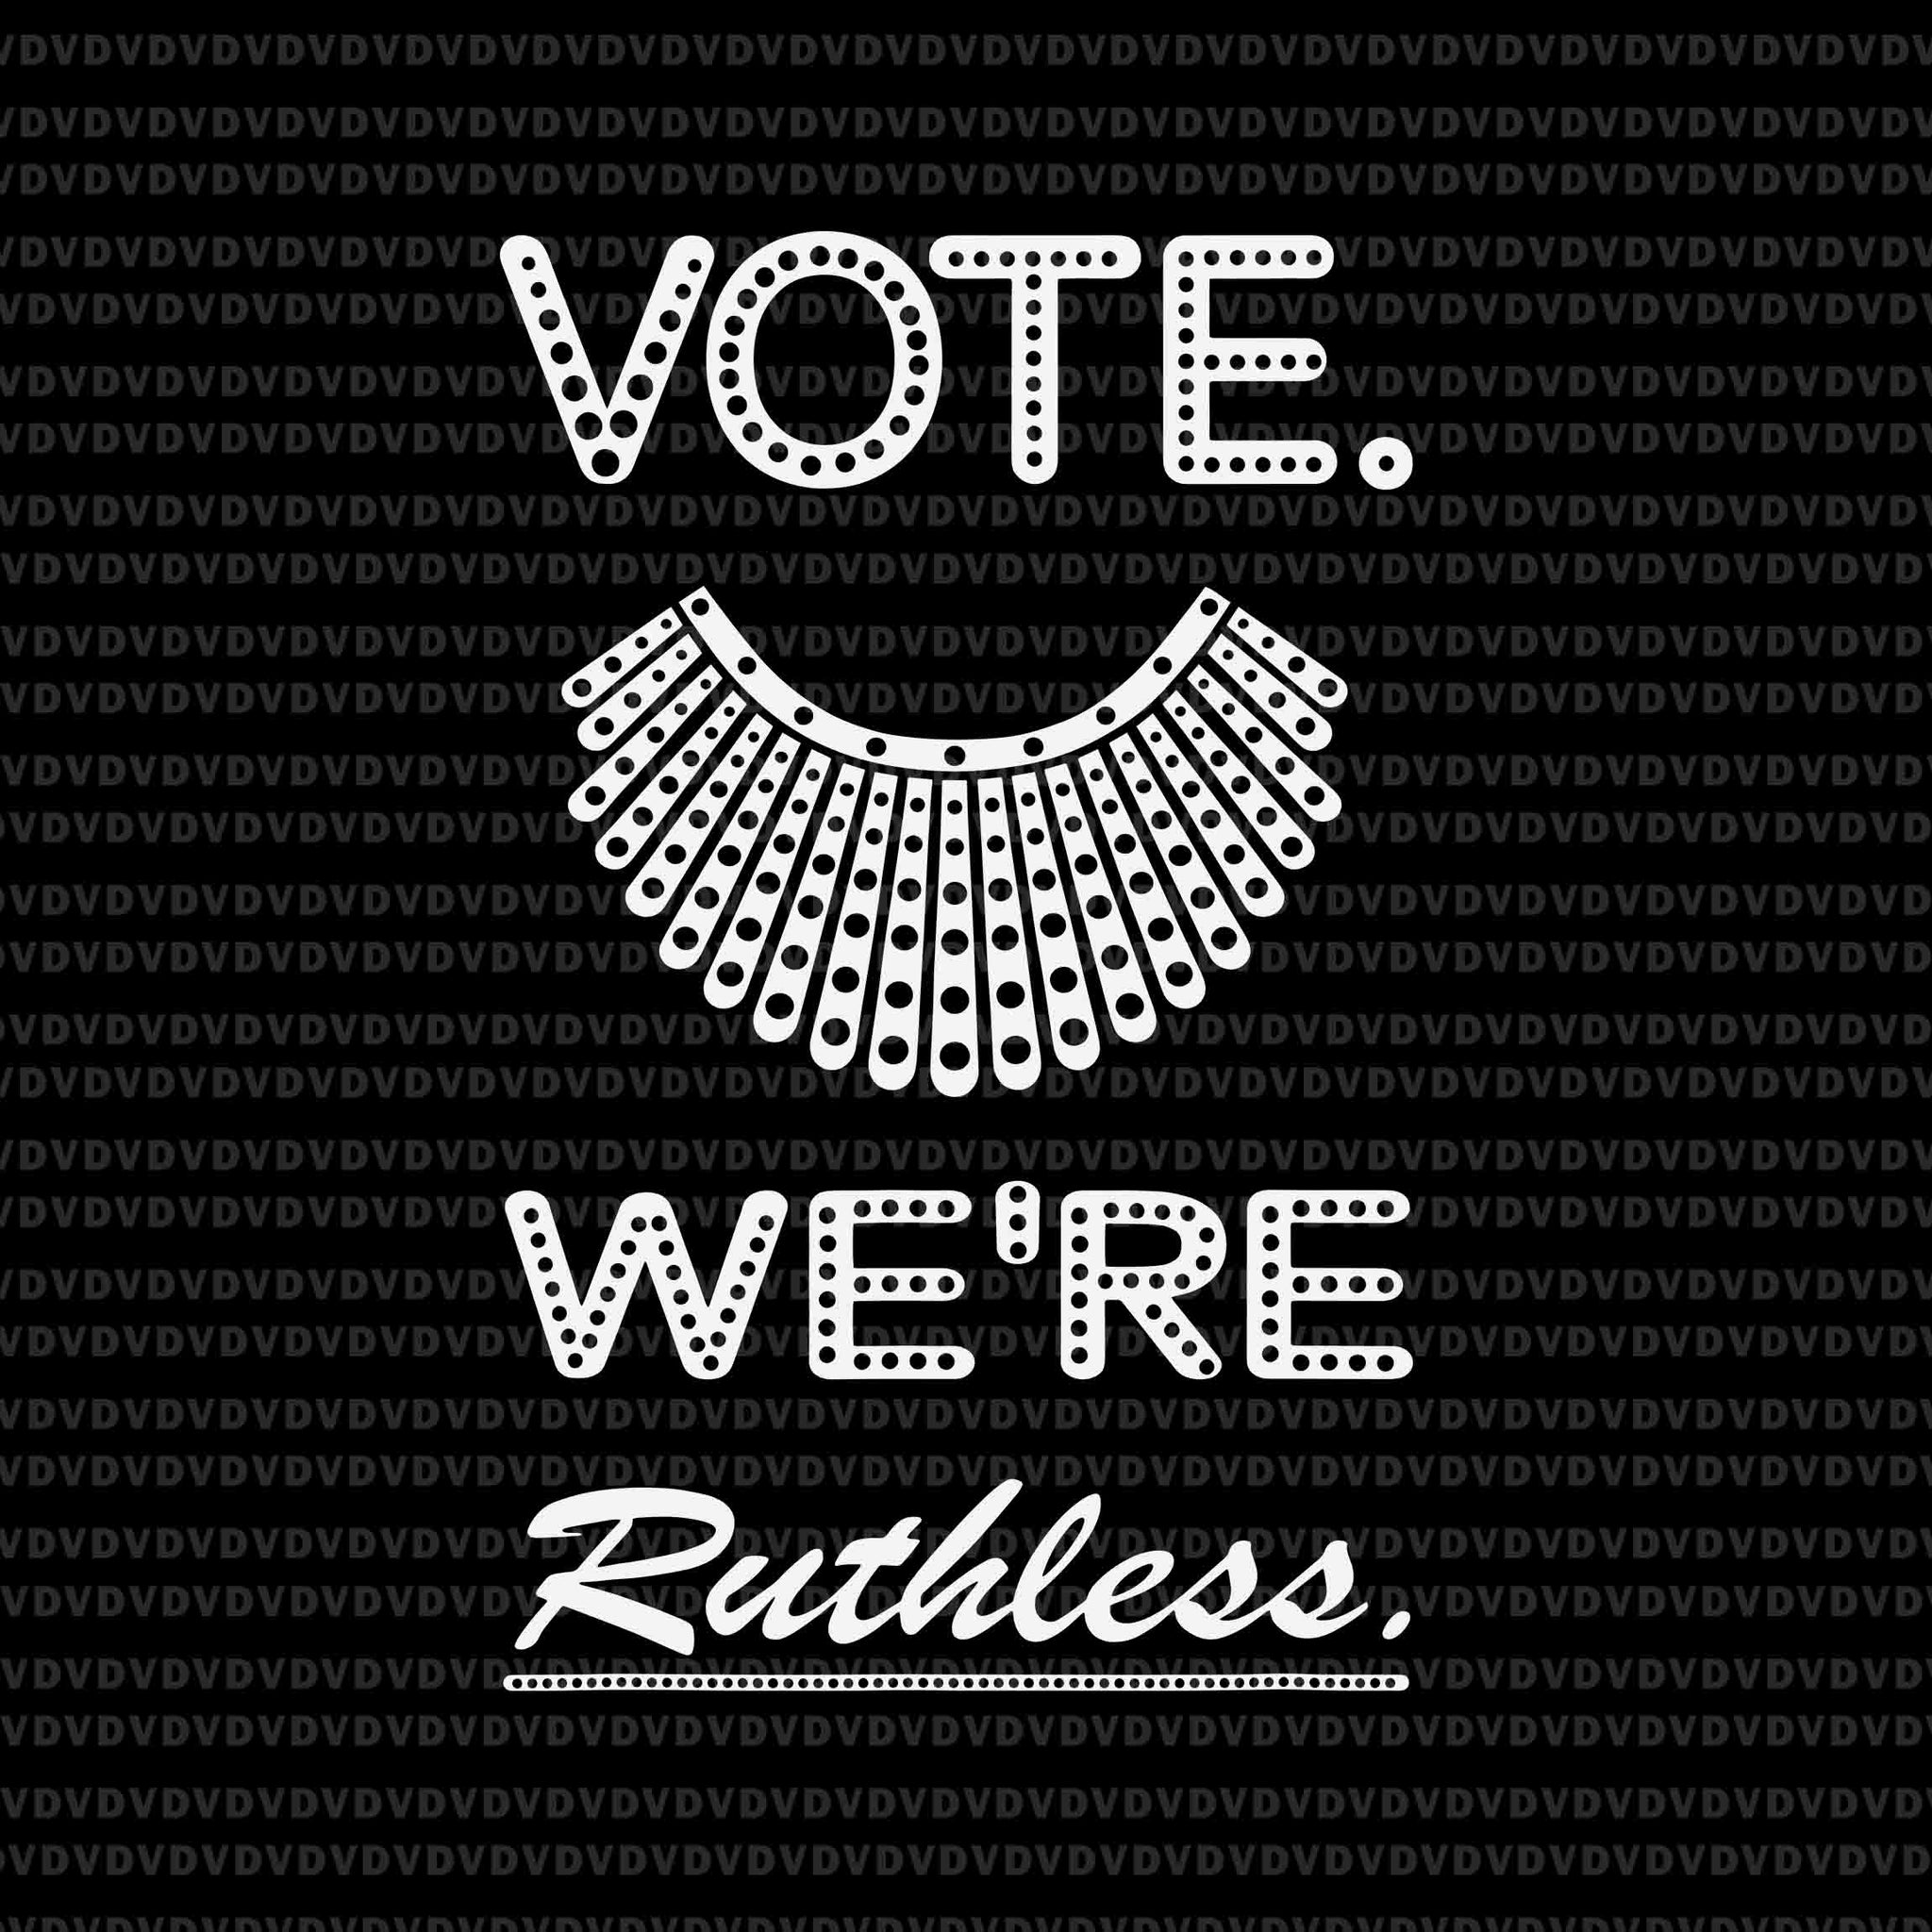 Vote We Are Ruthless Women's Rights Feminists Svg, Ruth Bader Ginsburg svg, RBG svg, Ruth Bader Ginsburg